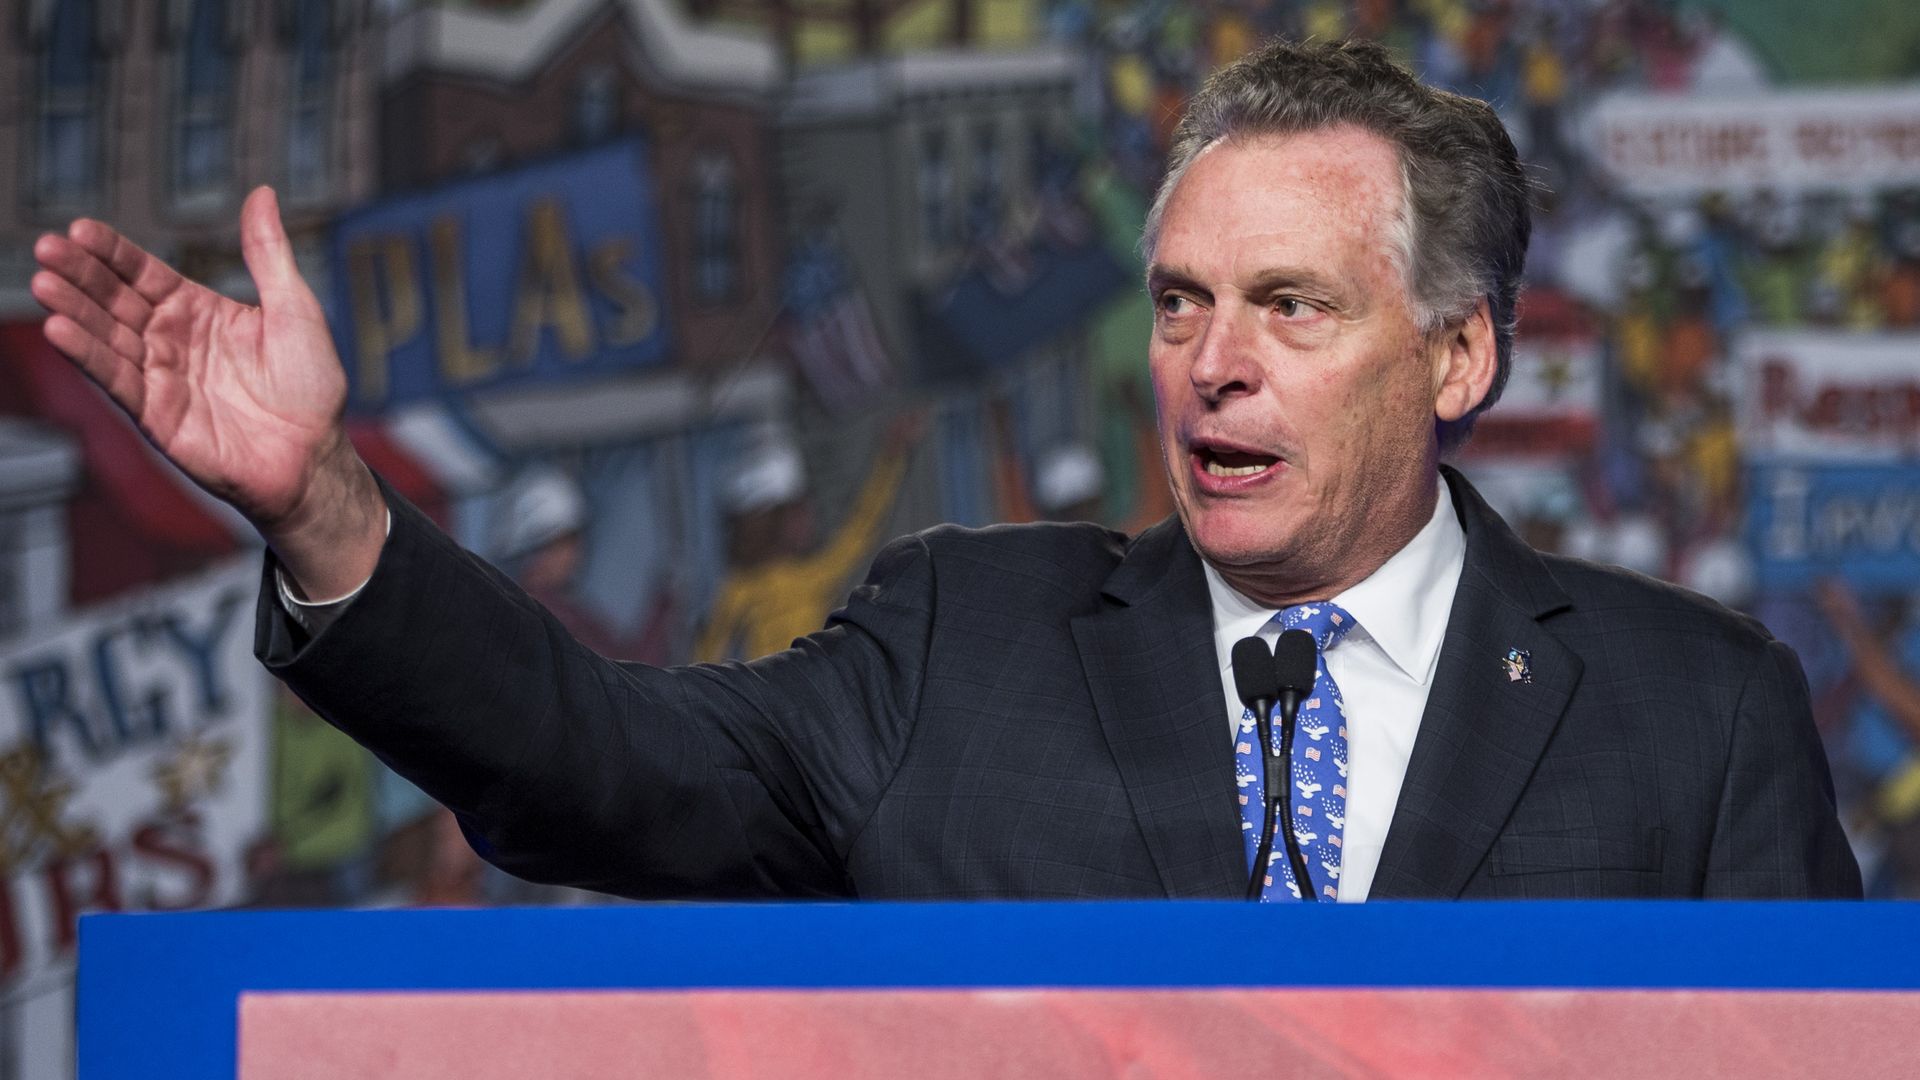 In this image, McAuliffe stands and gestures at a podium while speaking.